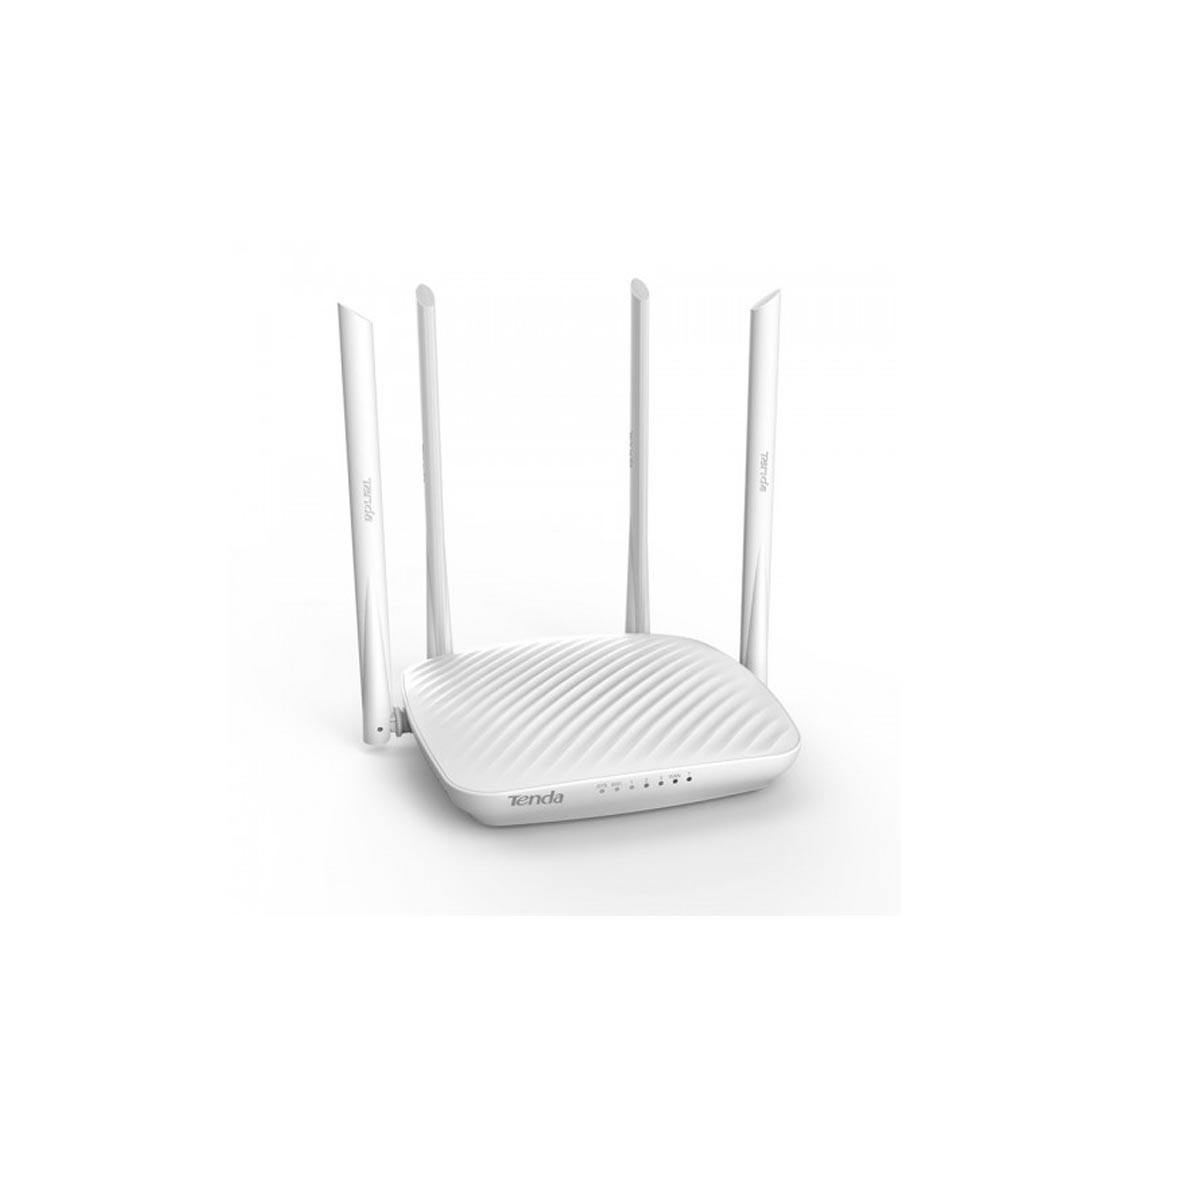 Tenda F9 600 Mbps Ethernet Single-Band Wi-Fi Router